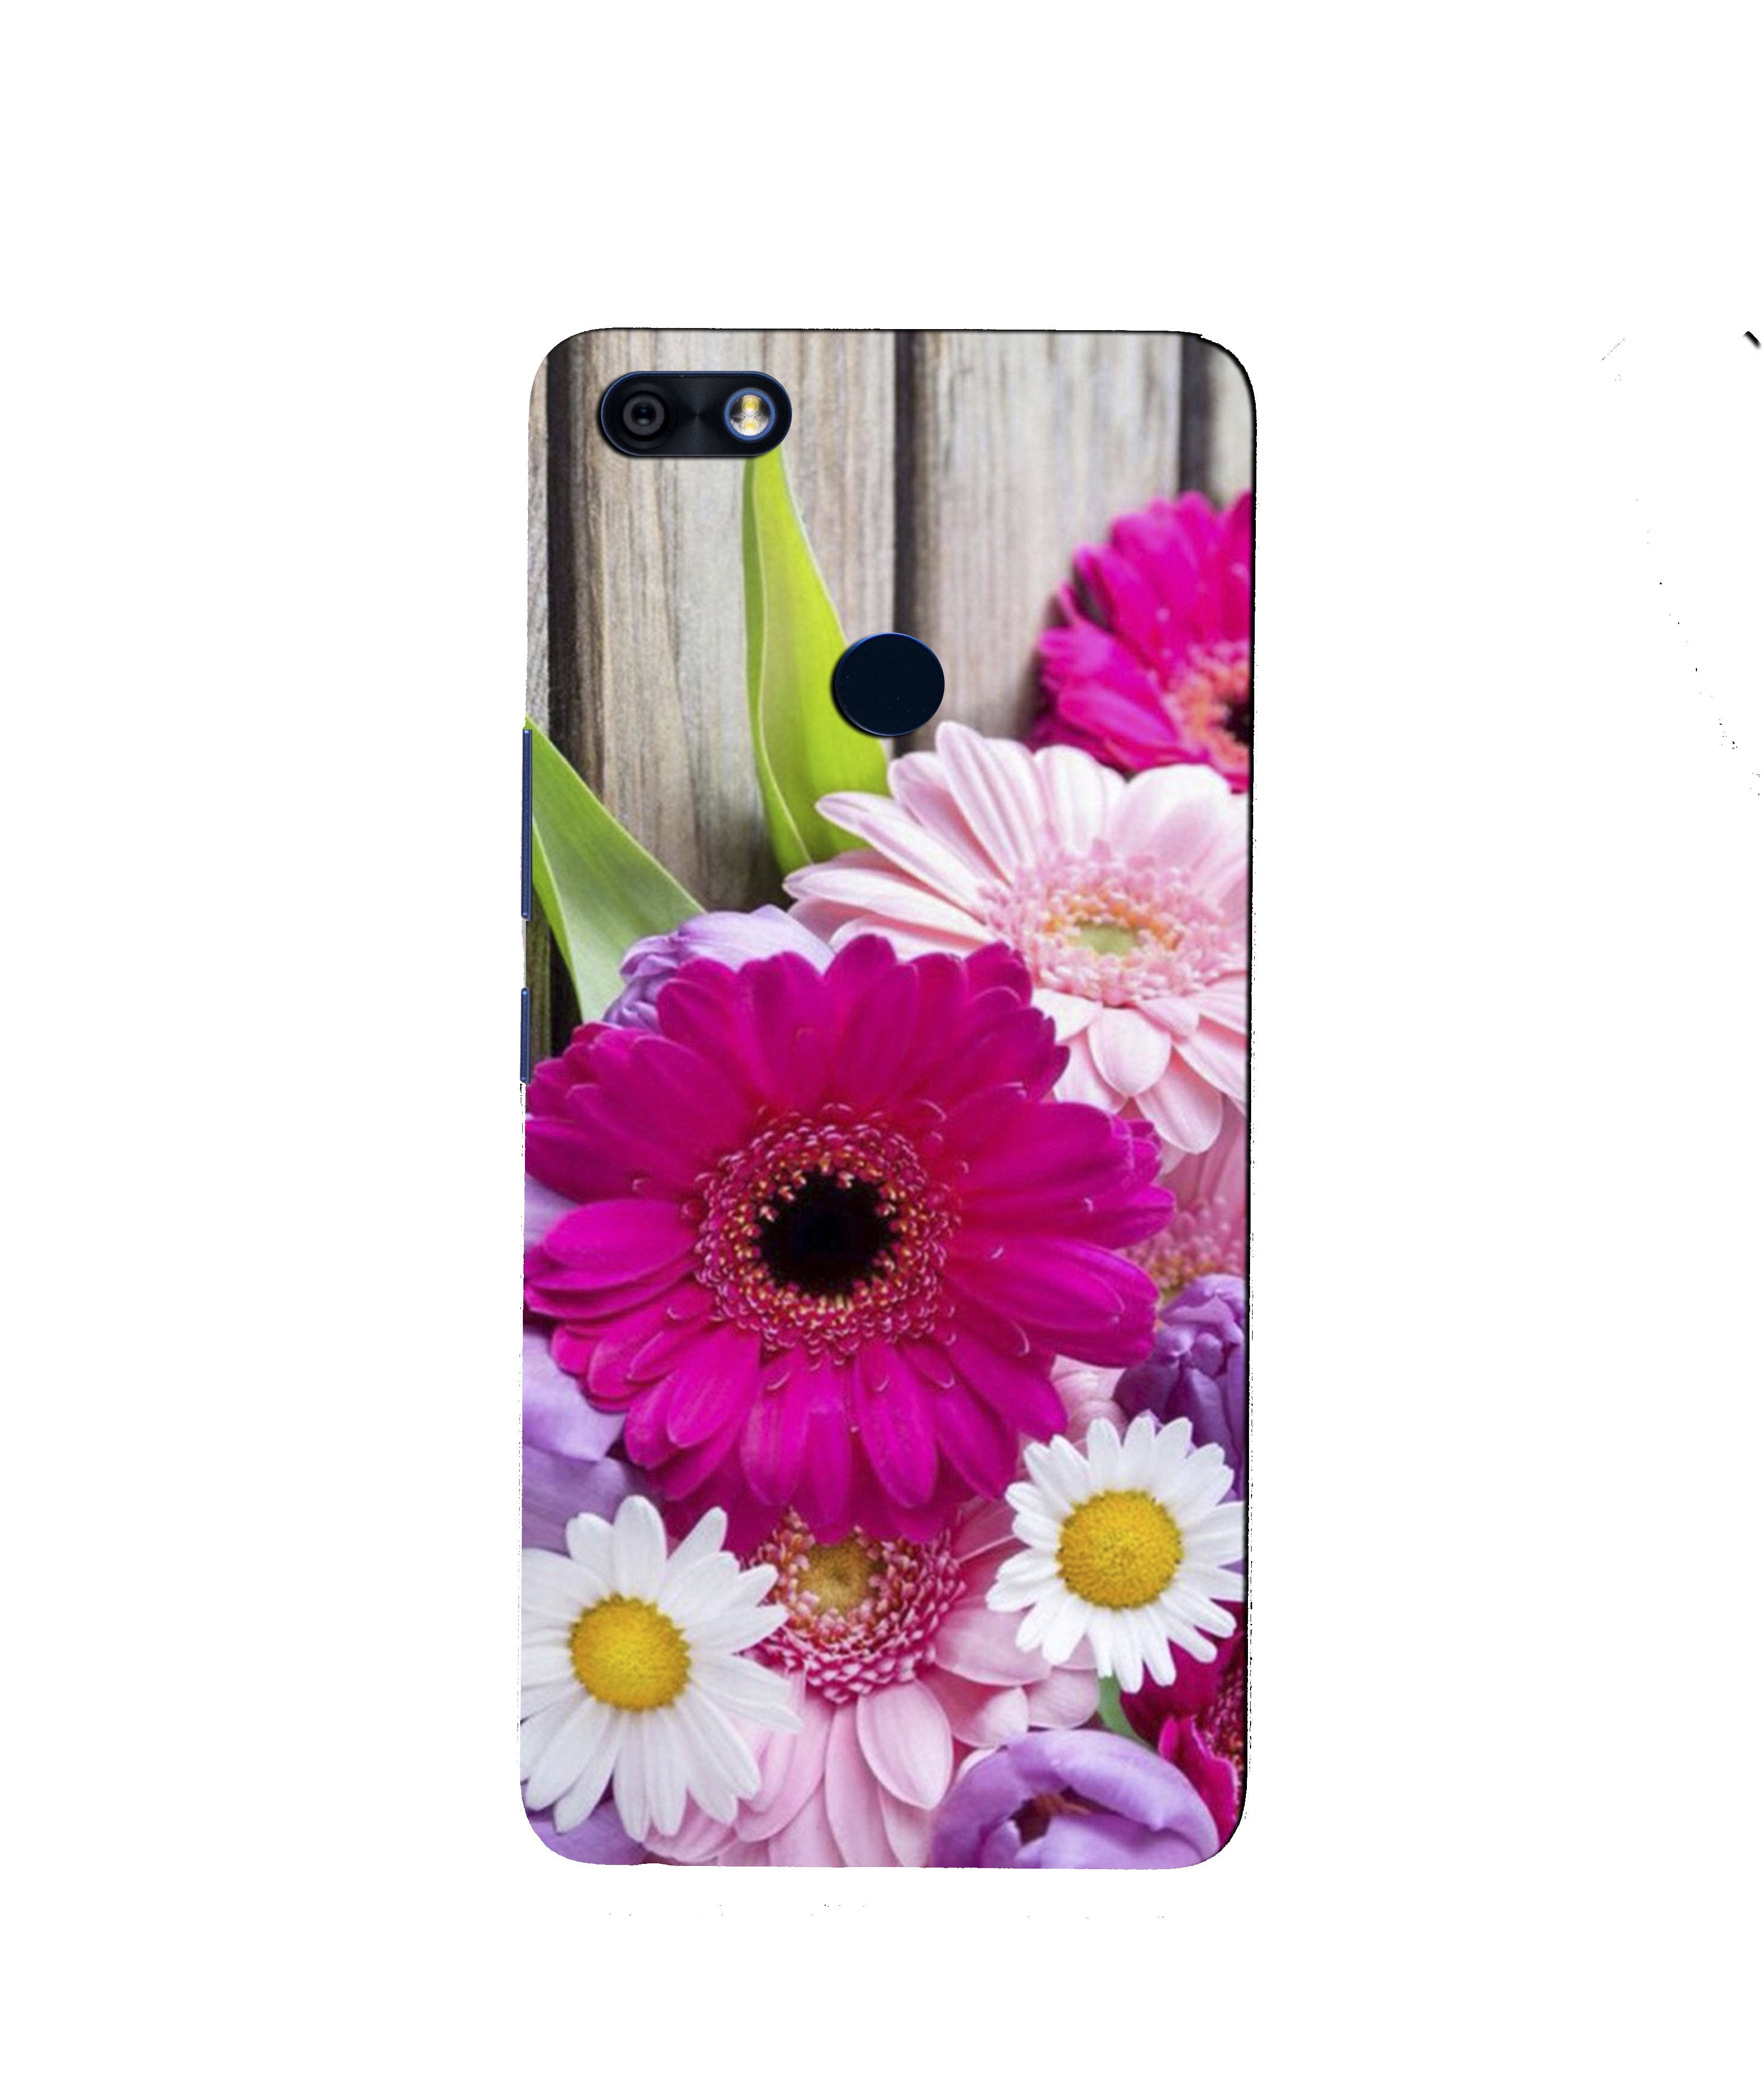 Coloful Daisy2 Case for Infinix Note 5 / Note 5 Pro